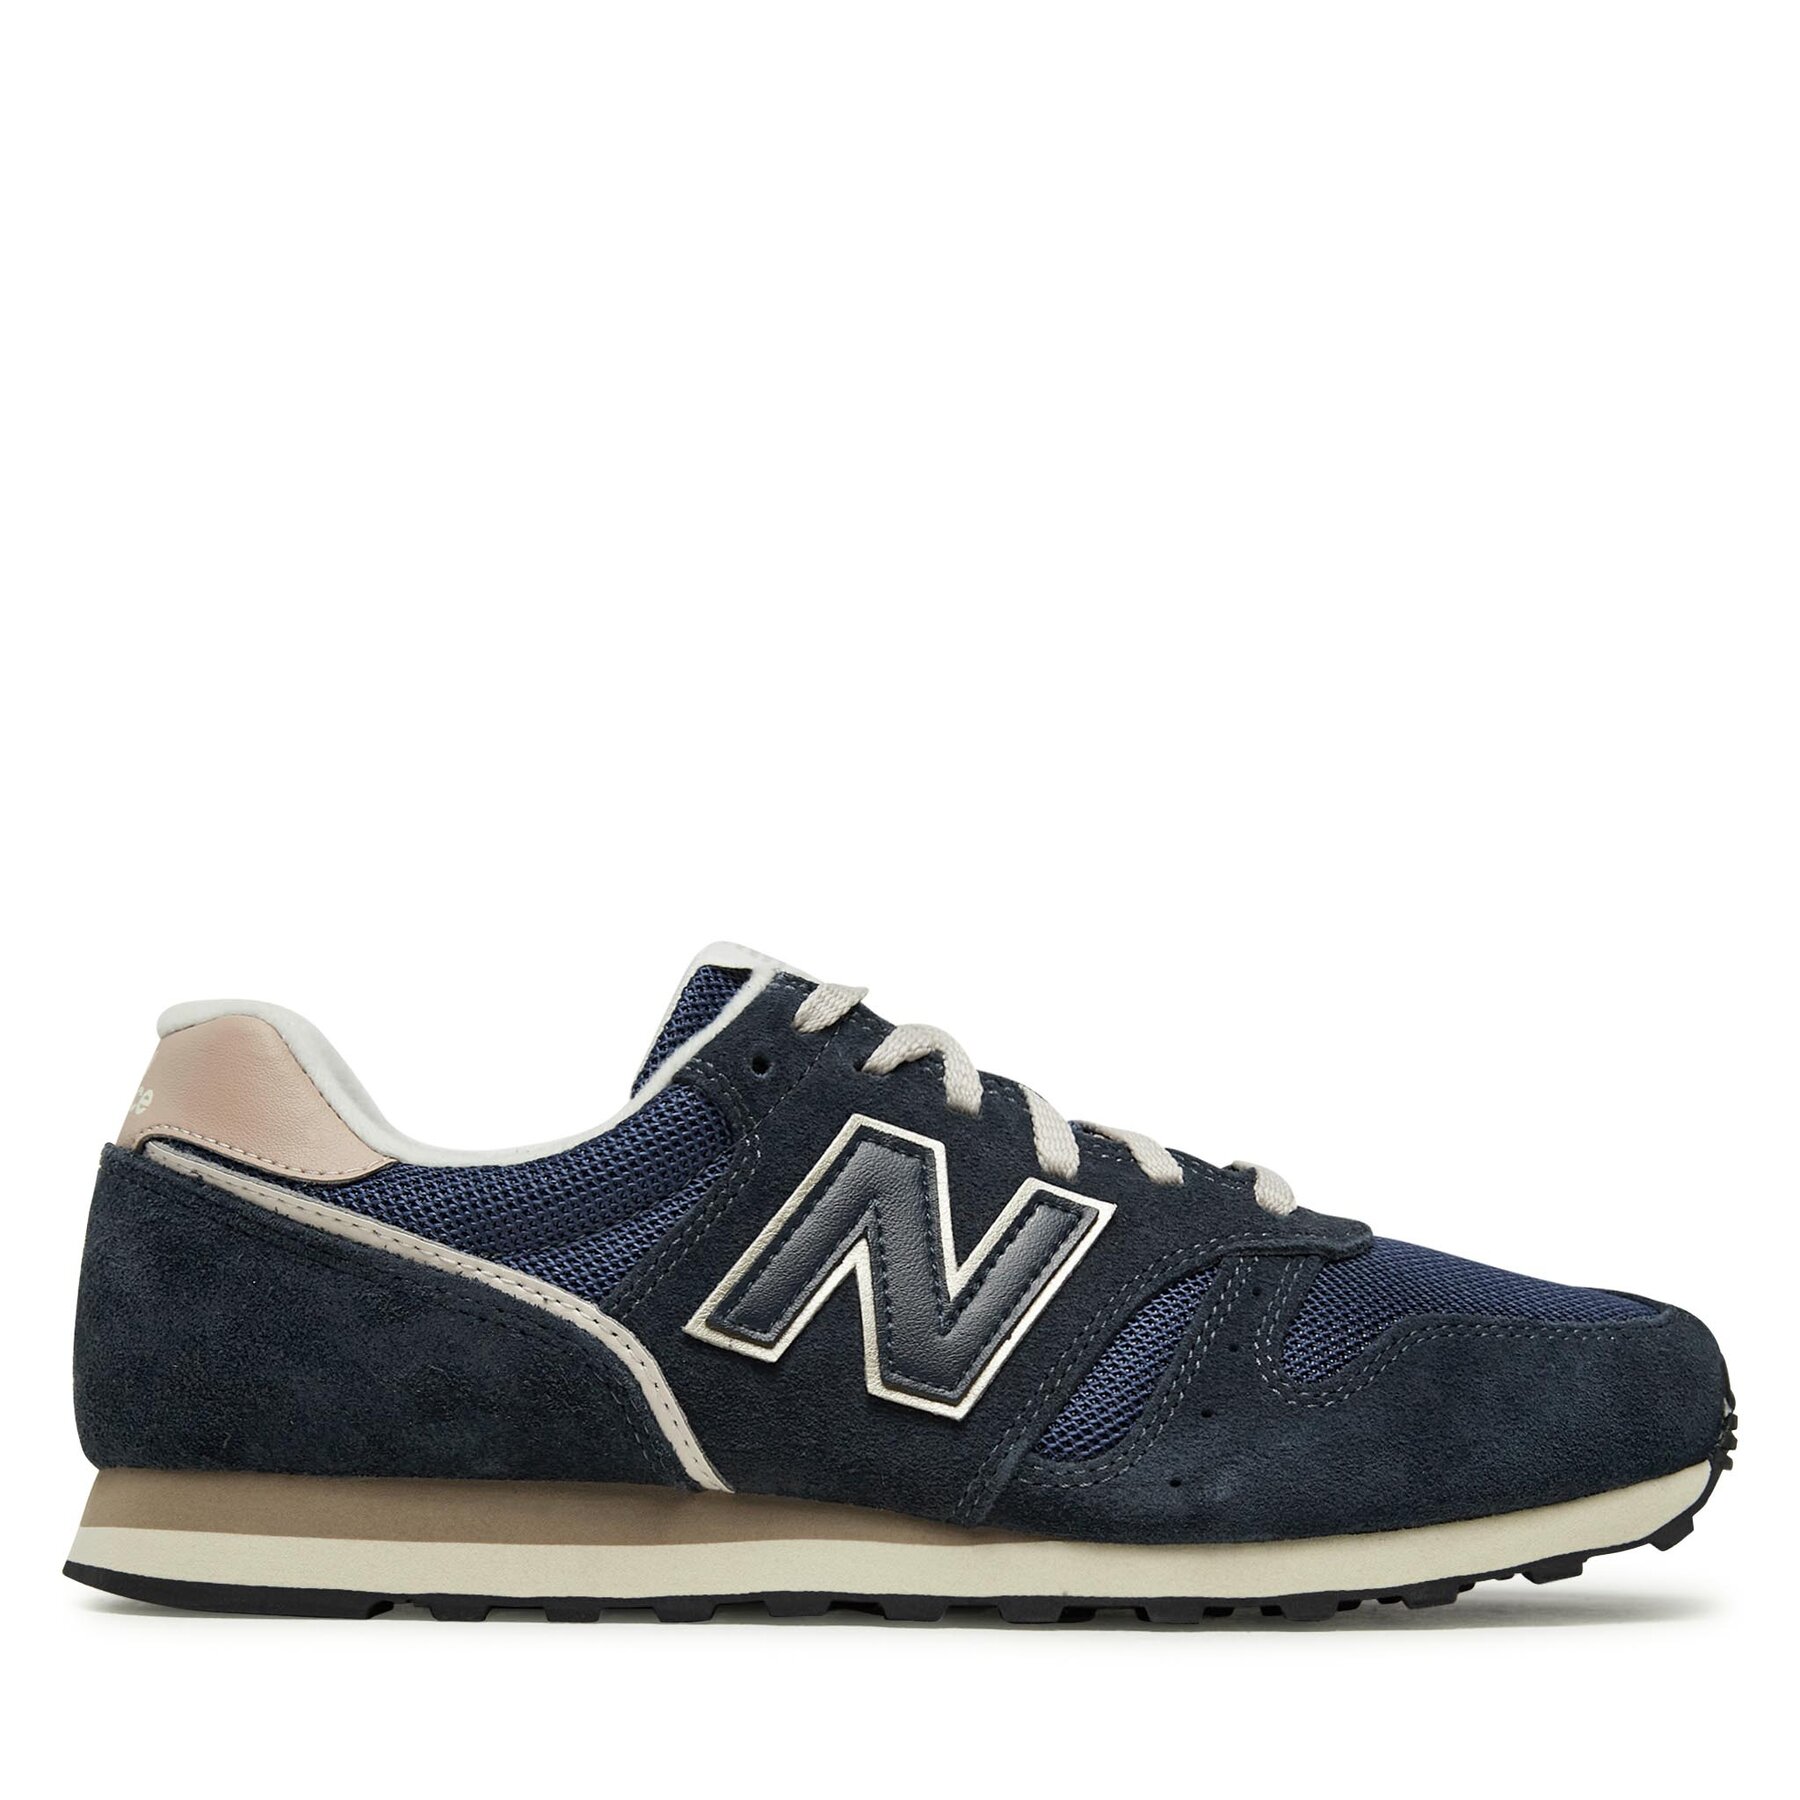 New Balance M 373 outerspace blue